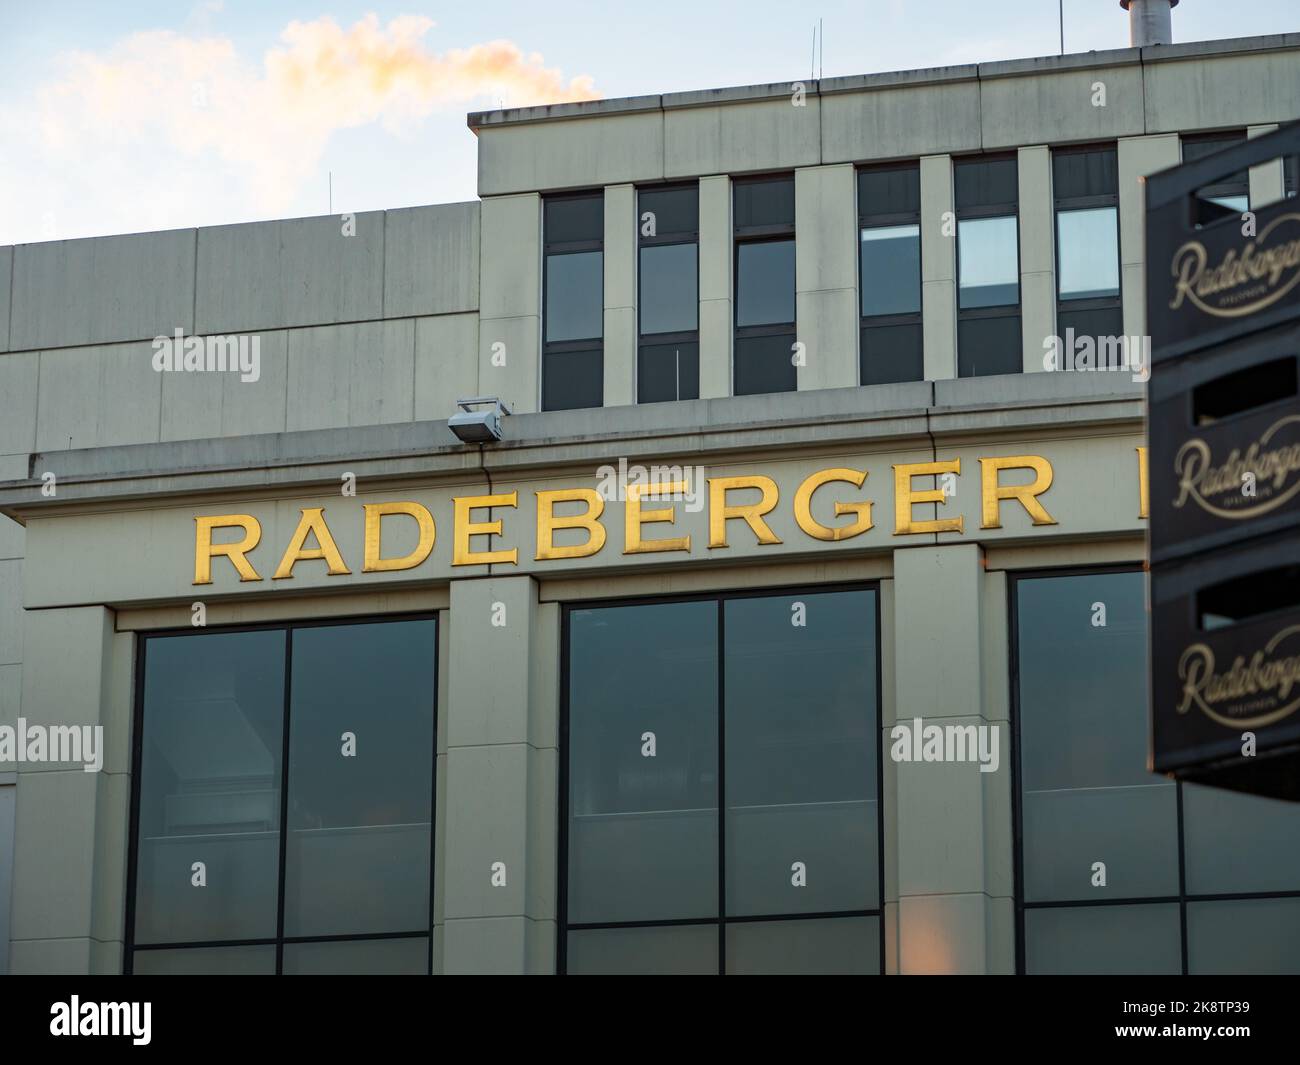 Radeberger lettering of the famous beer brand. Golden letters on the brewery in Saxony. Close-up of the building exterior. Beer crates are visible. Stock Photo